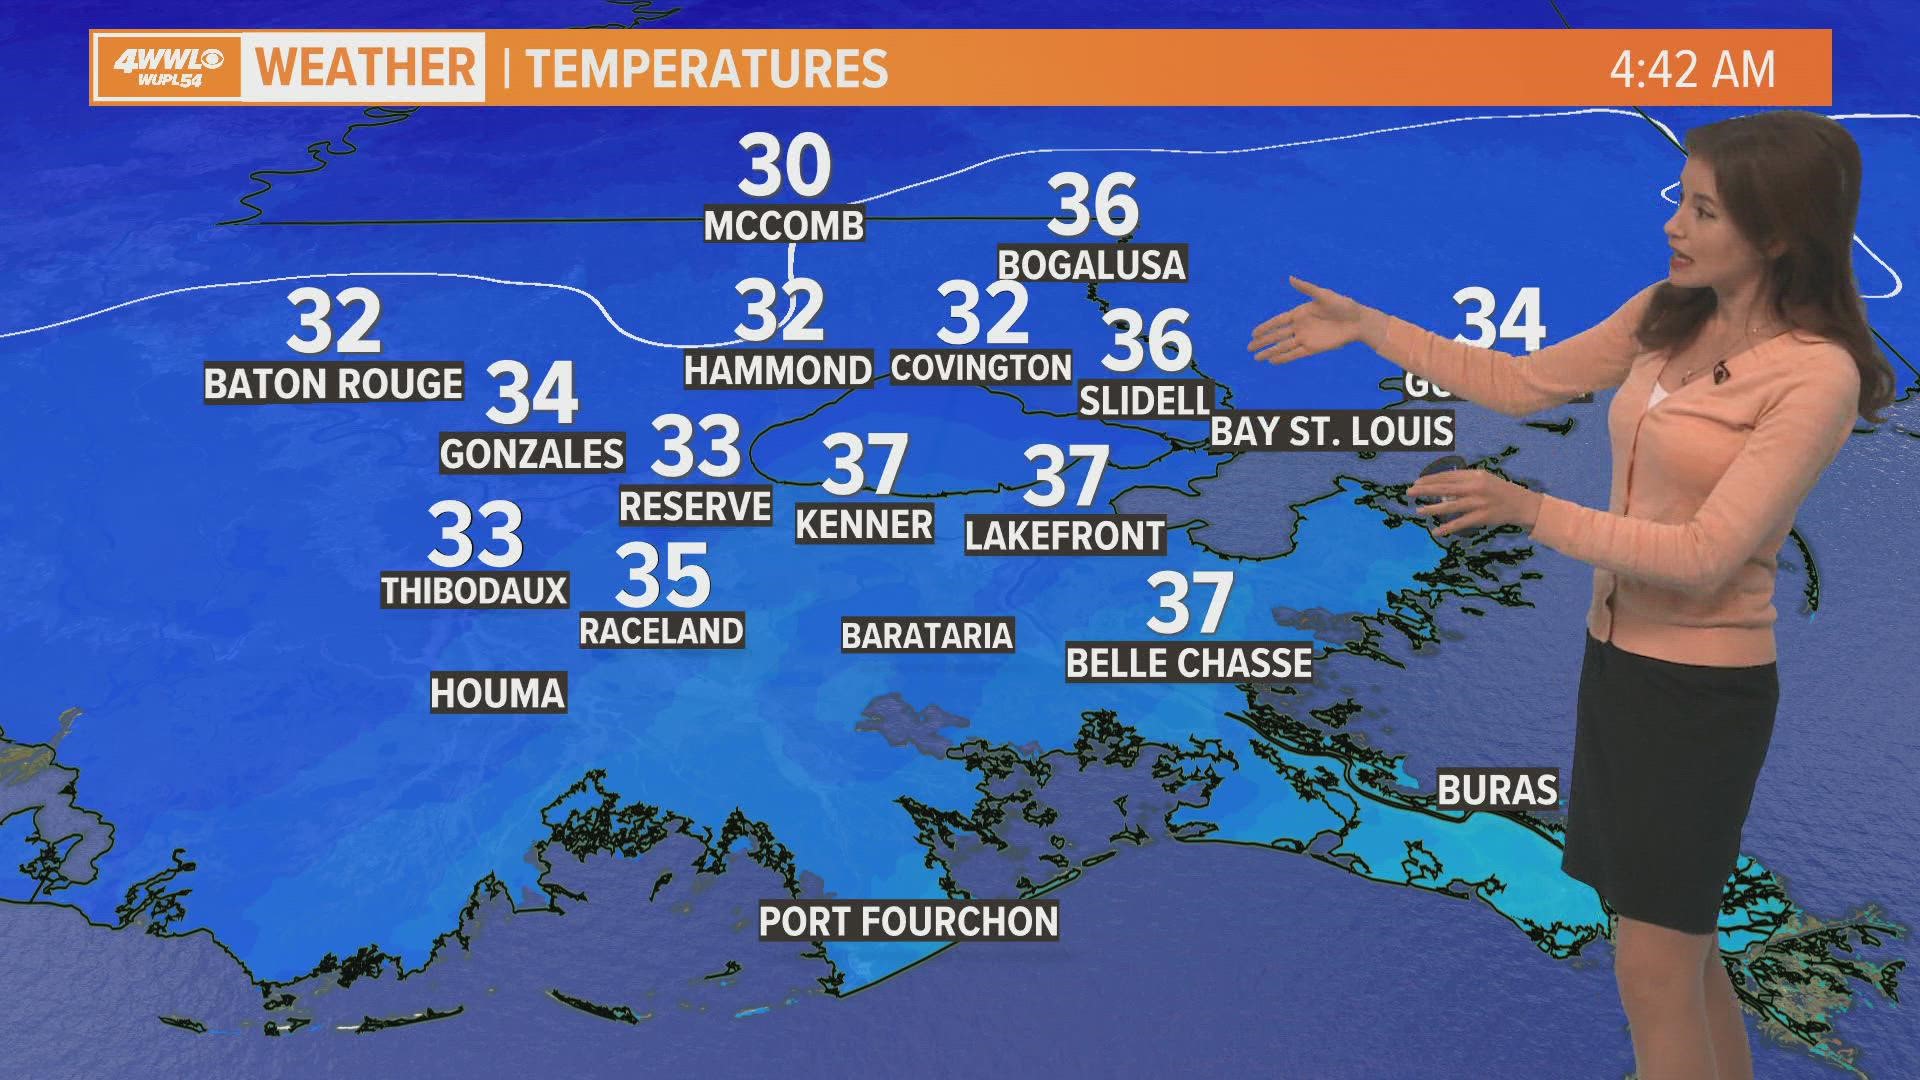 A hard freeze follows on Saturday and Sunday mornings on the Northshore and river parishes.